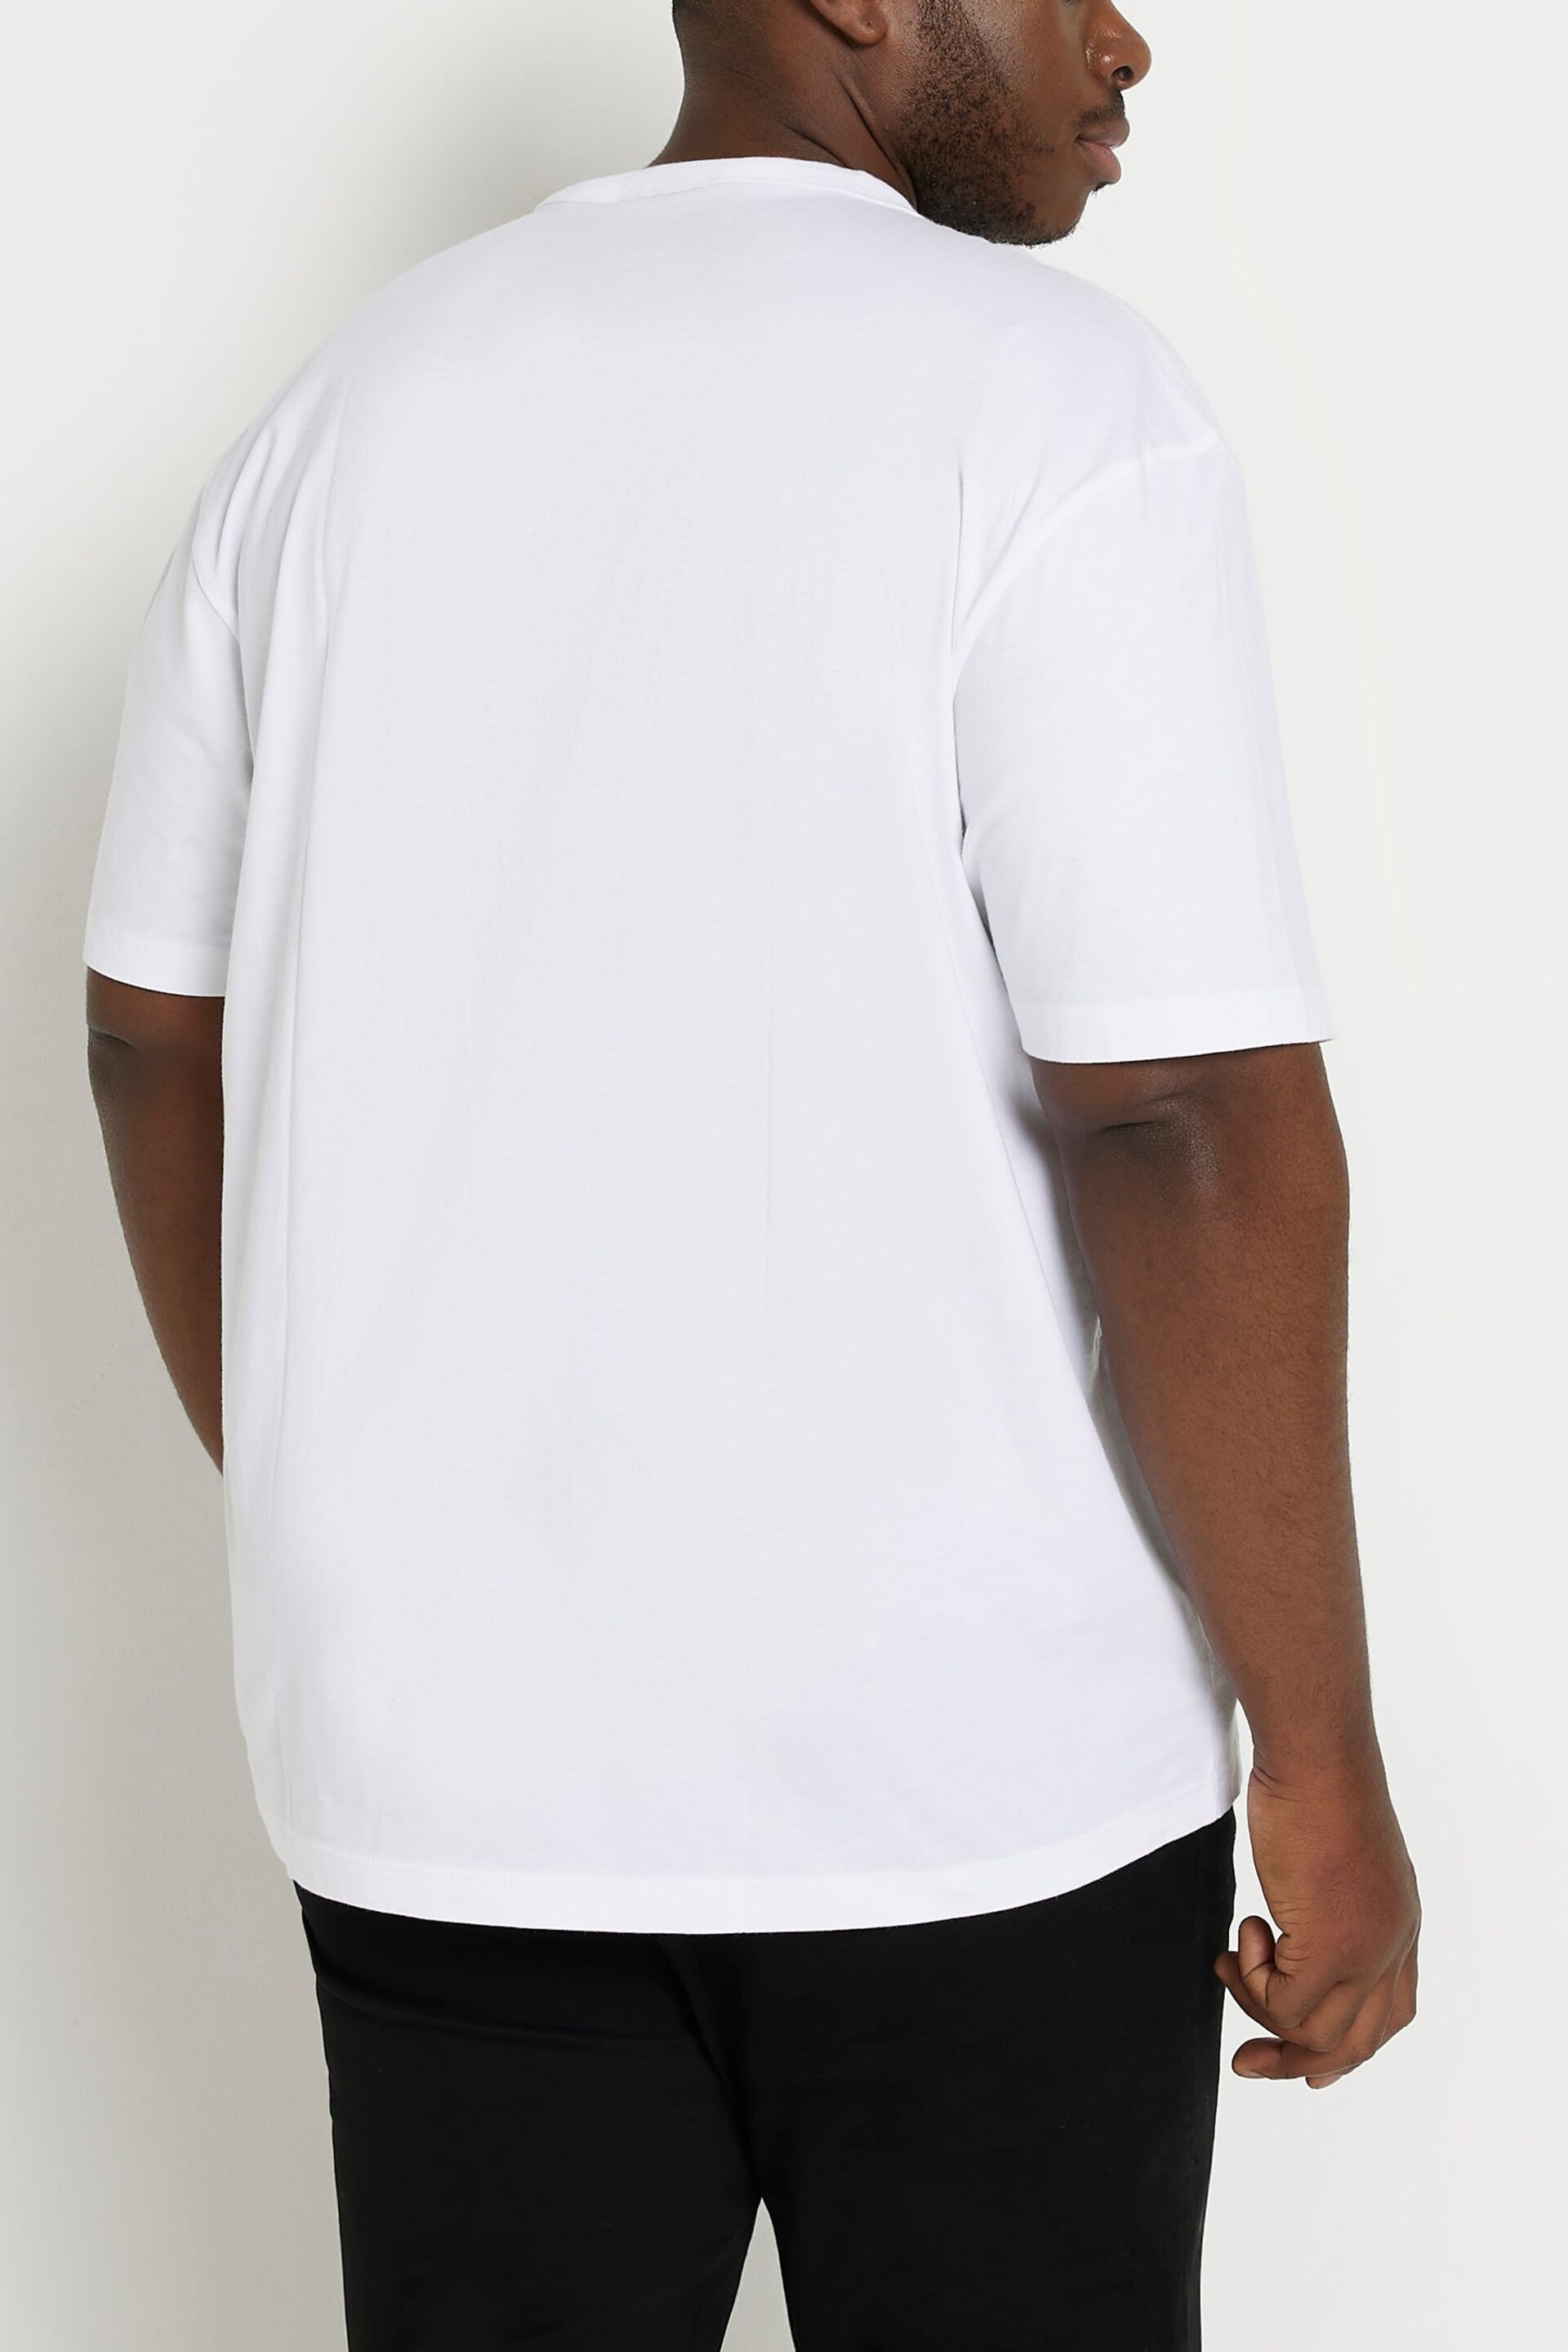 River Island White Big & Tall Regular Fit T-Shirt - Image 2 of 4